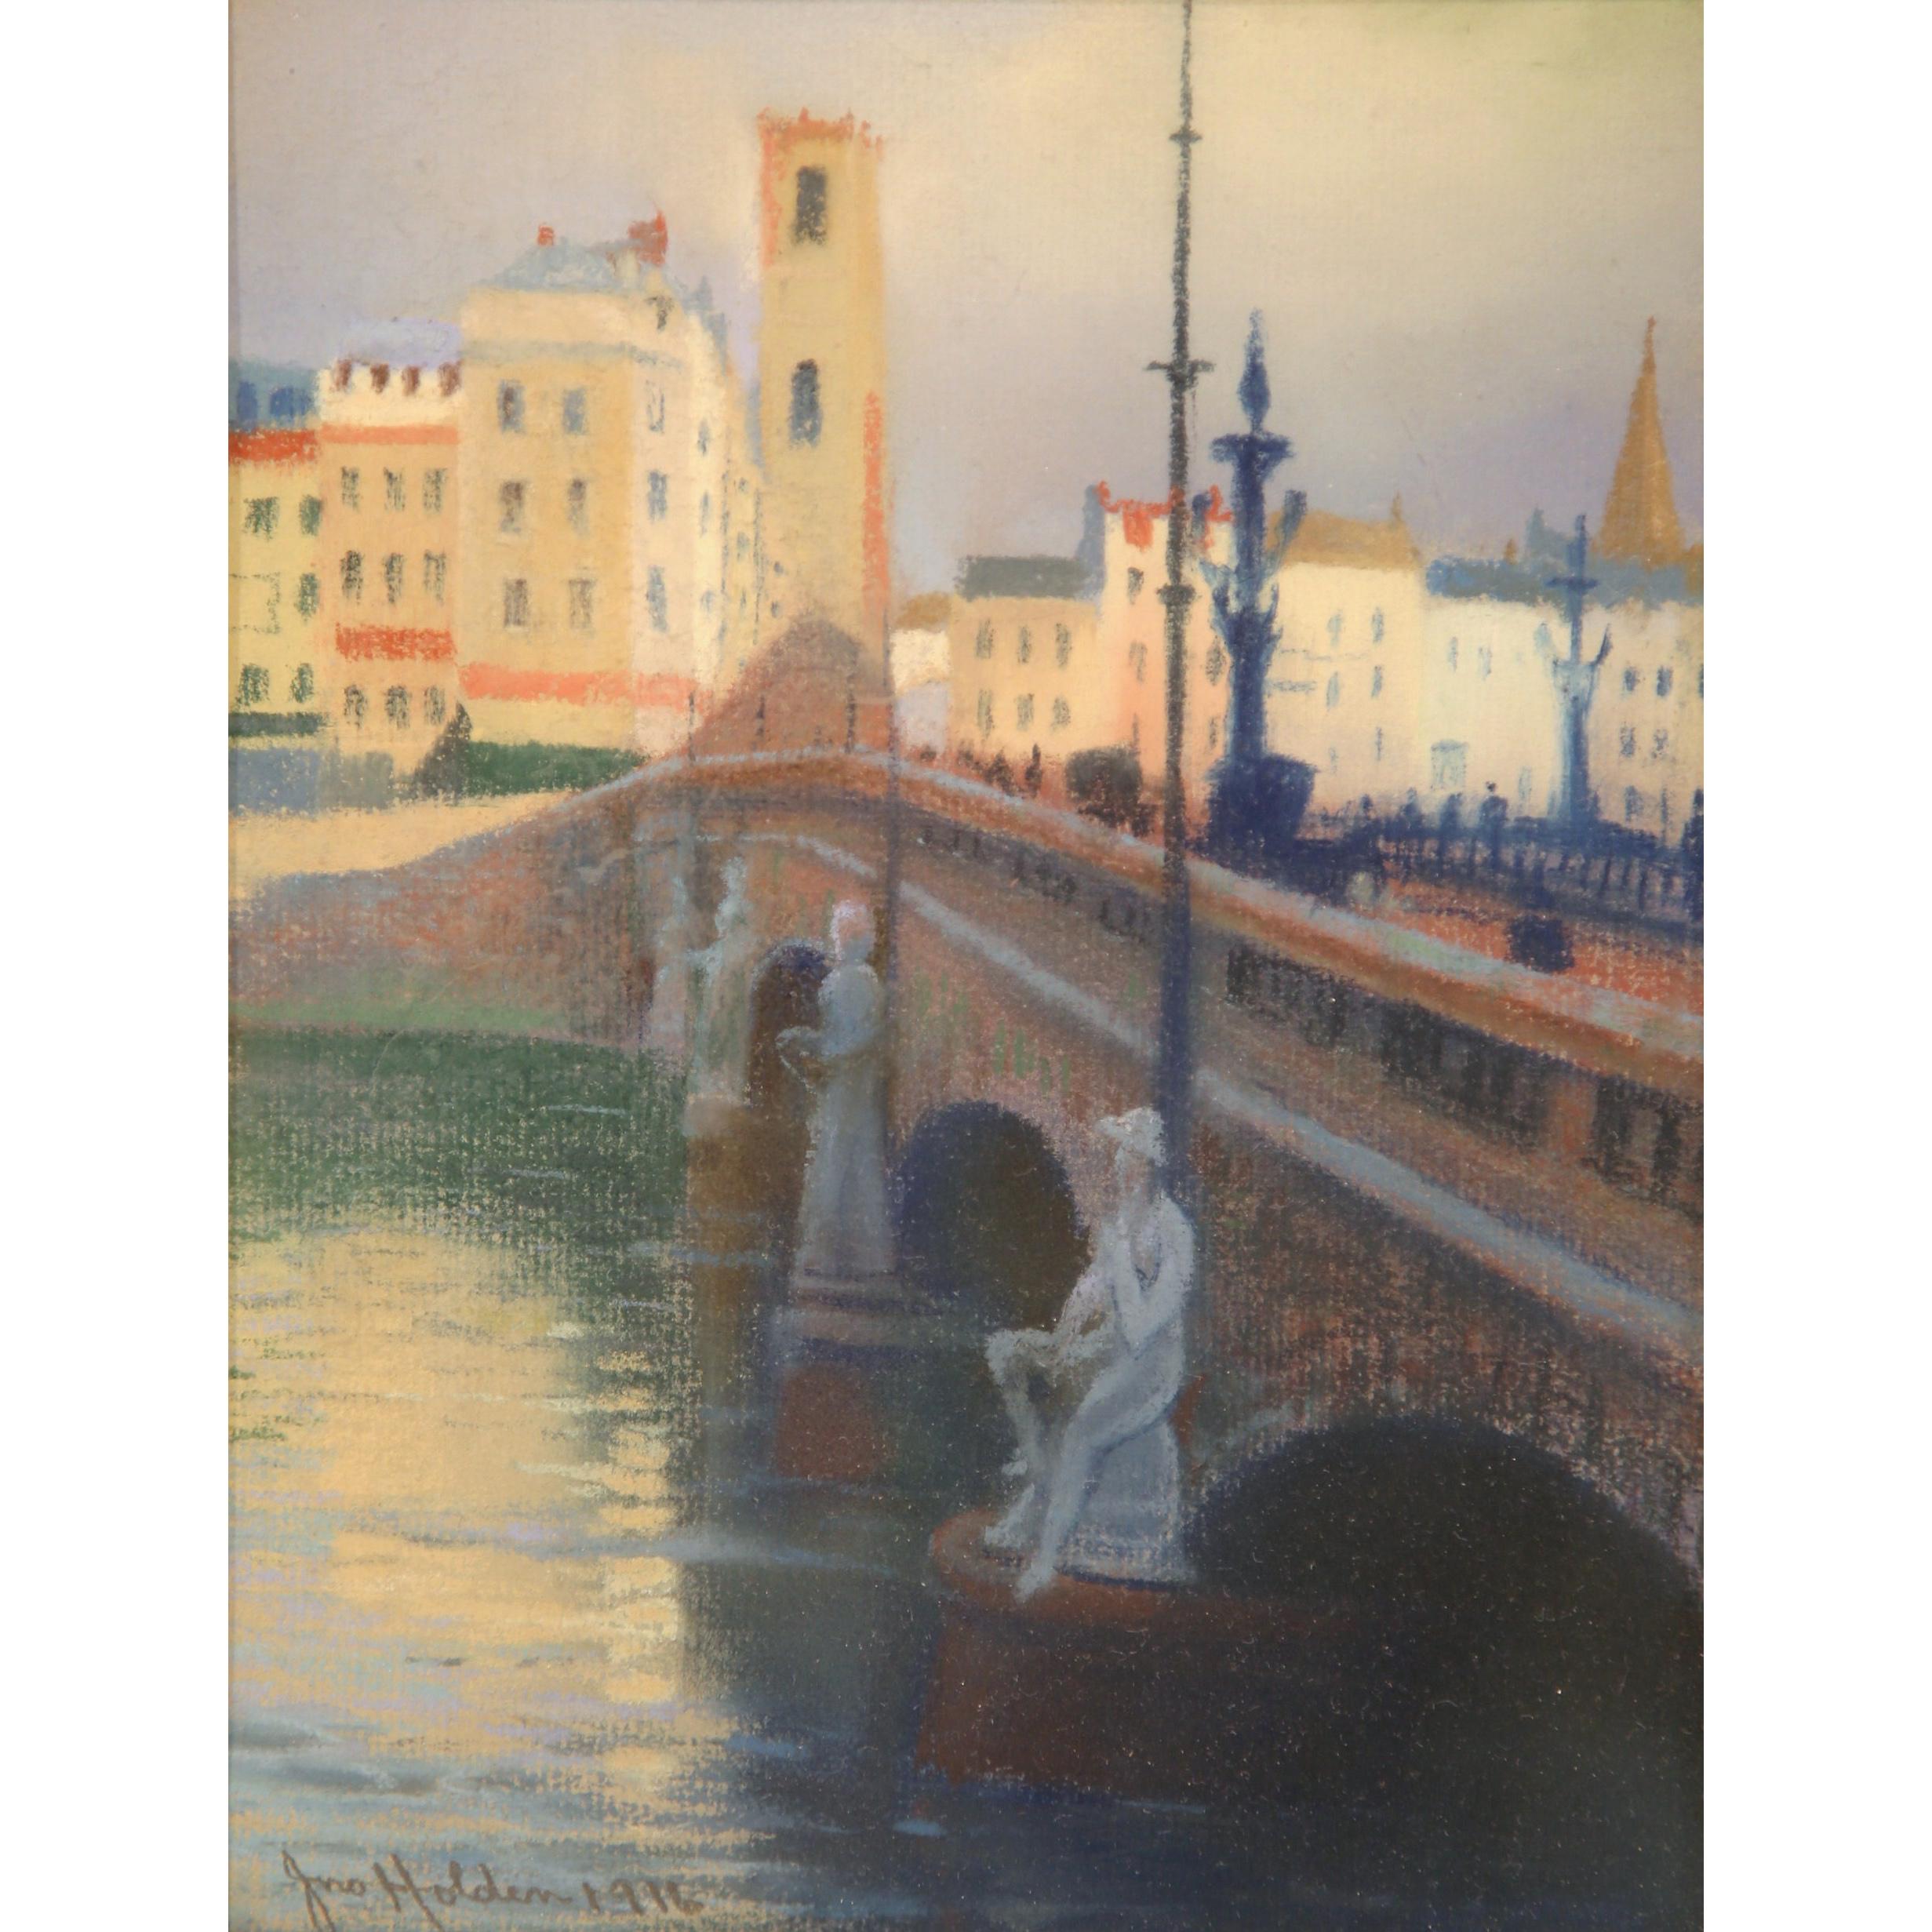 This fine pair of antique watercolors was painted in England, and is signed and dated Holden, 1916. The compositions show two cityscapes situated on a river. The color palette is soft and neutral, and the pieces are covered with clear glass. The